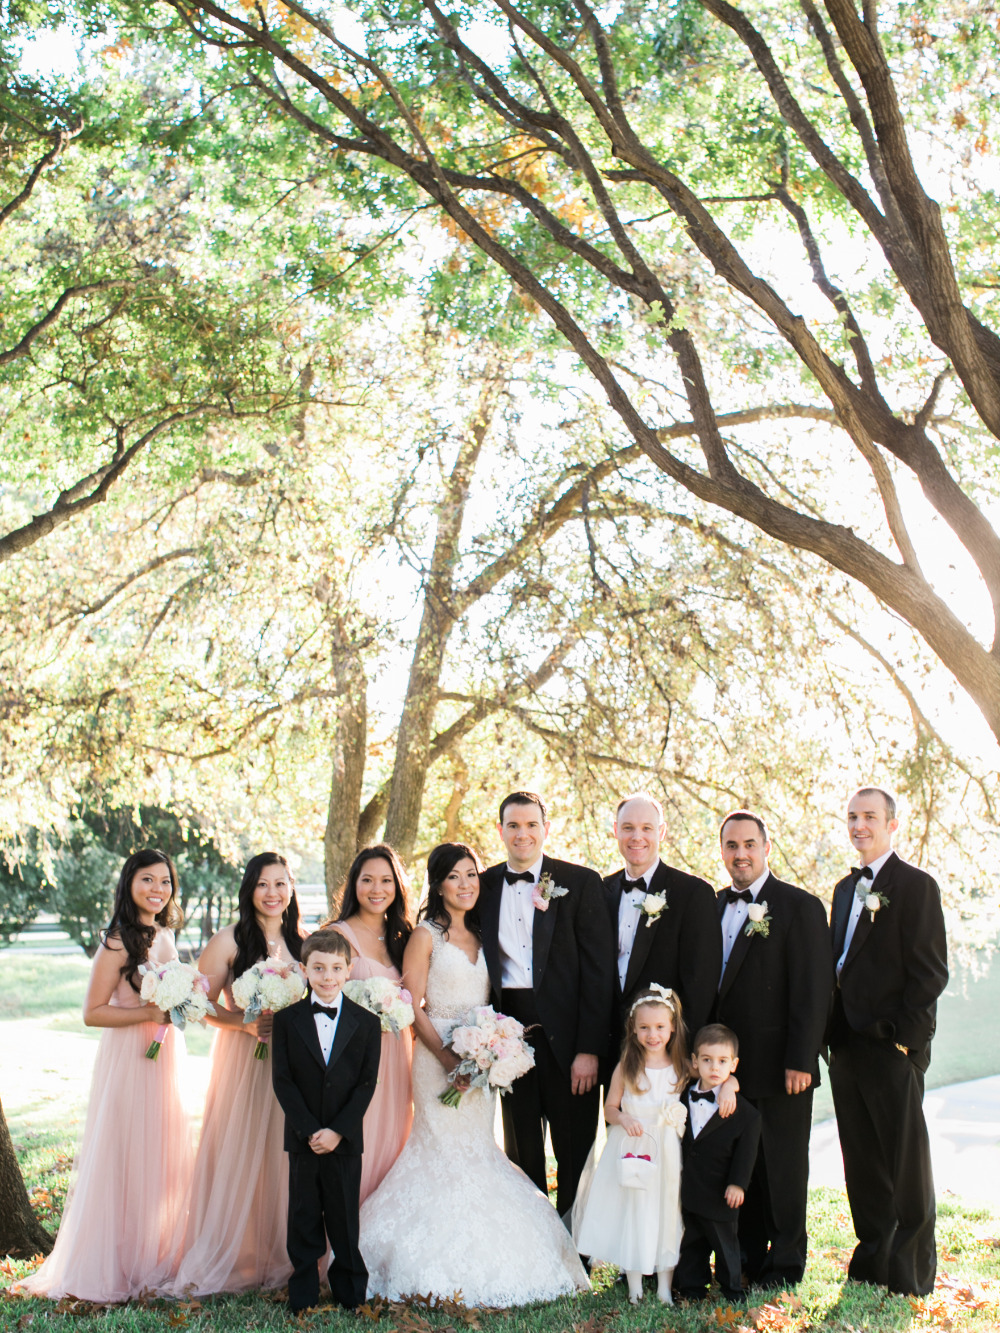 pink and black classic wedding party attire